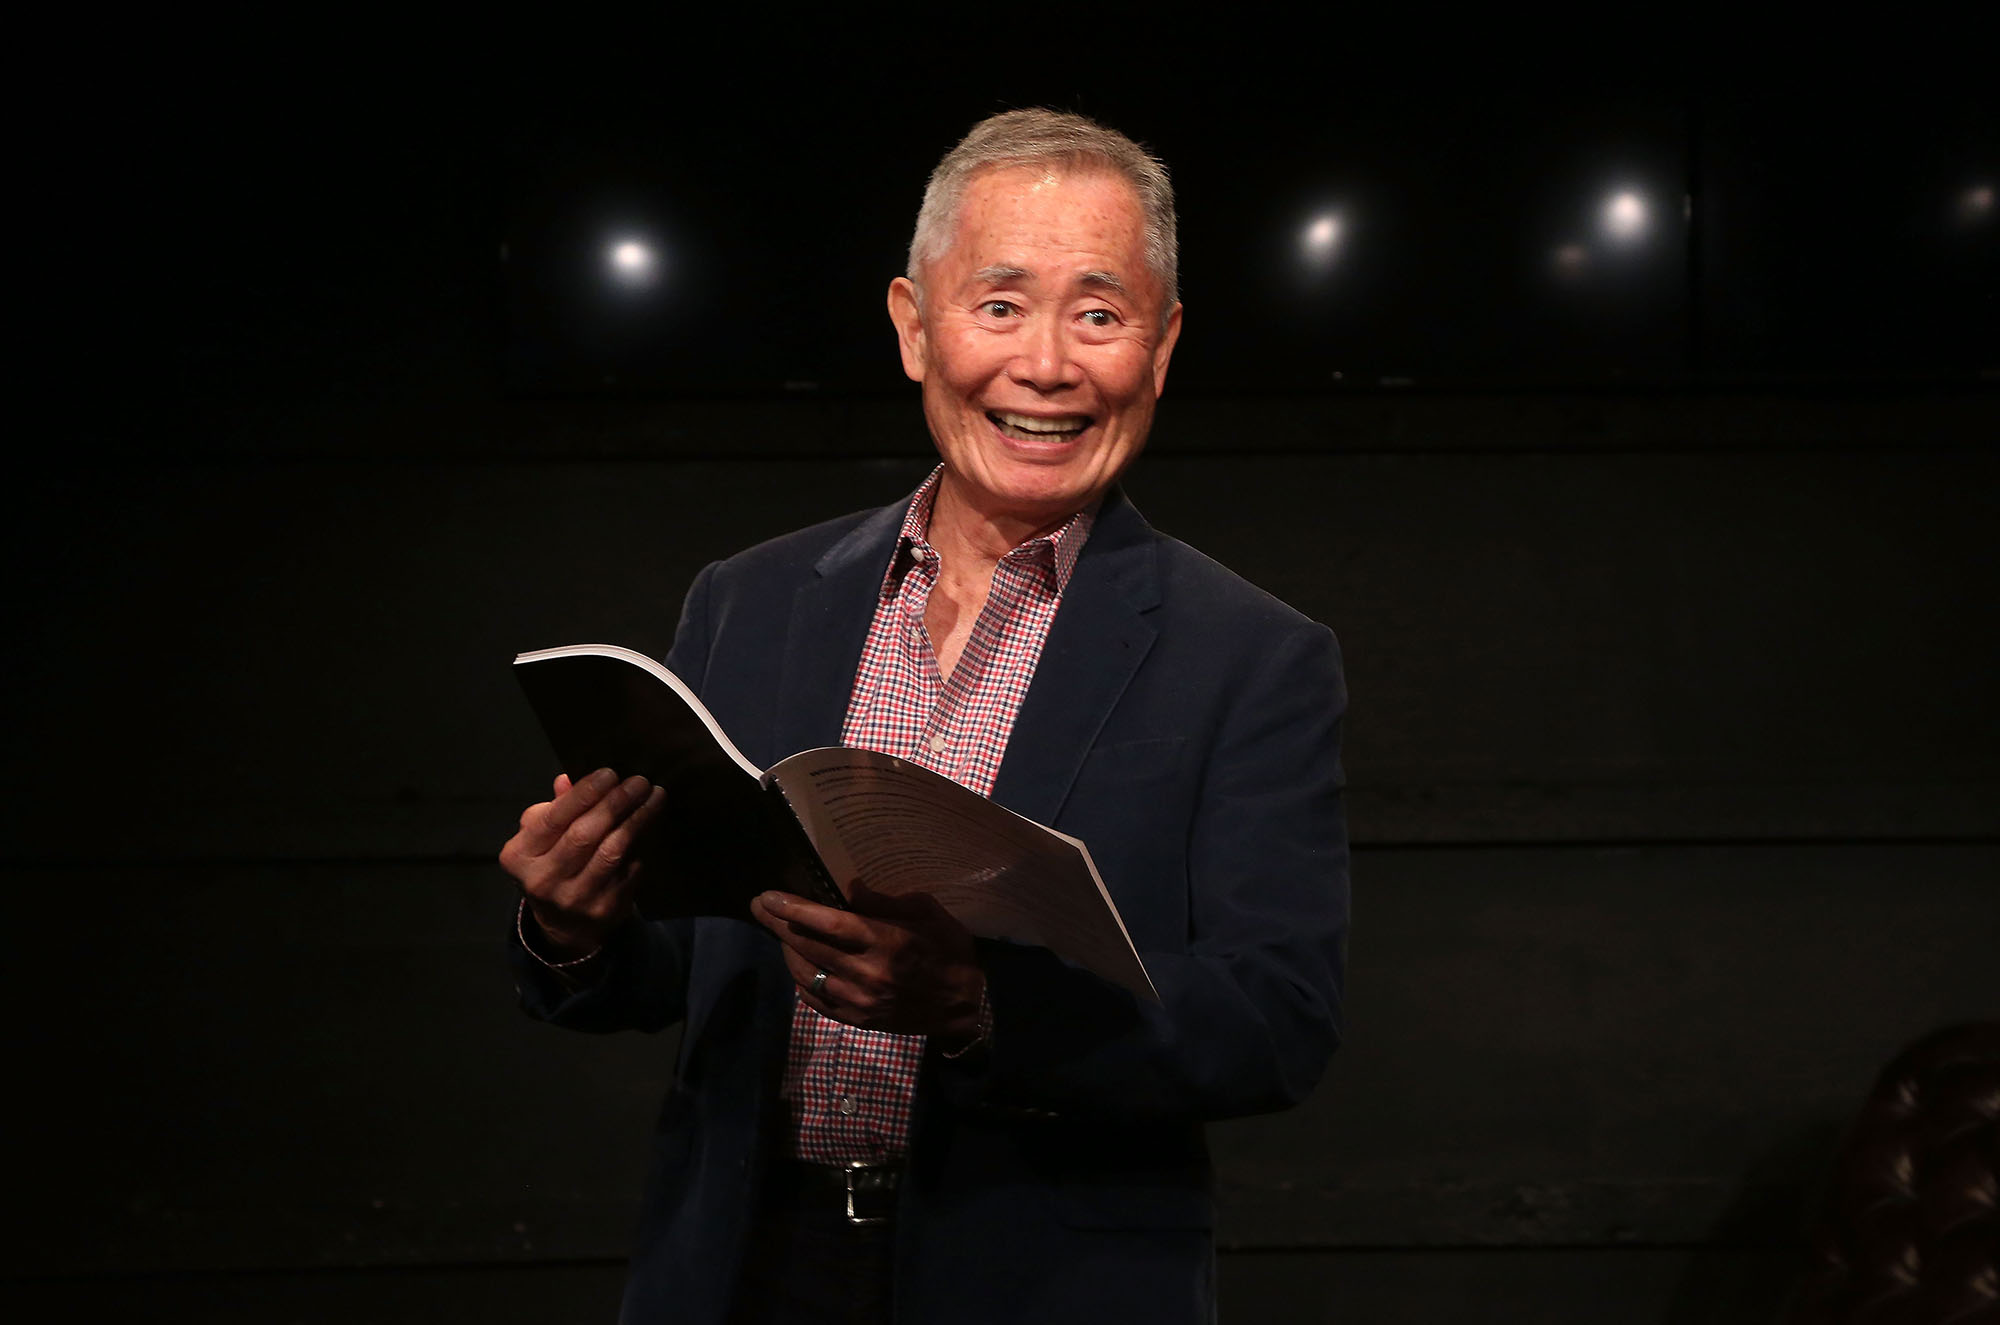 George Takei performing in the new play "White Rabbit Red Rabbit" at The Westside Theatre on June 15, 2016 in New York City.